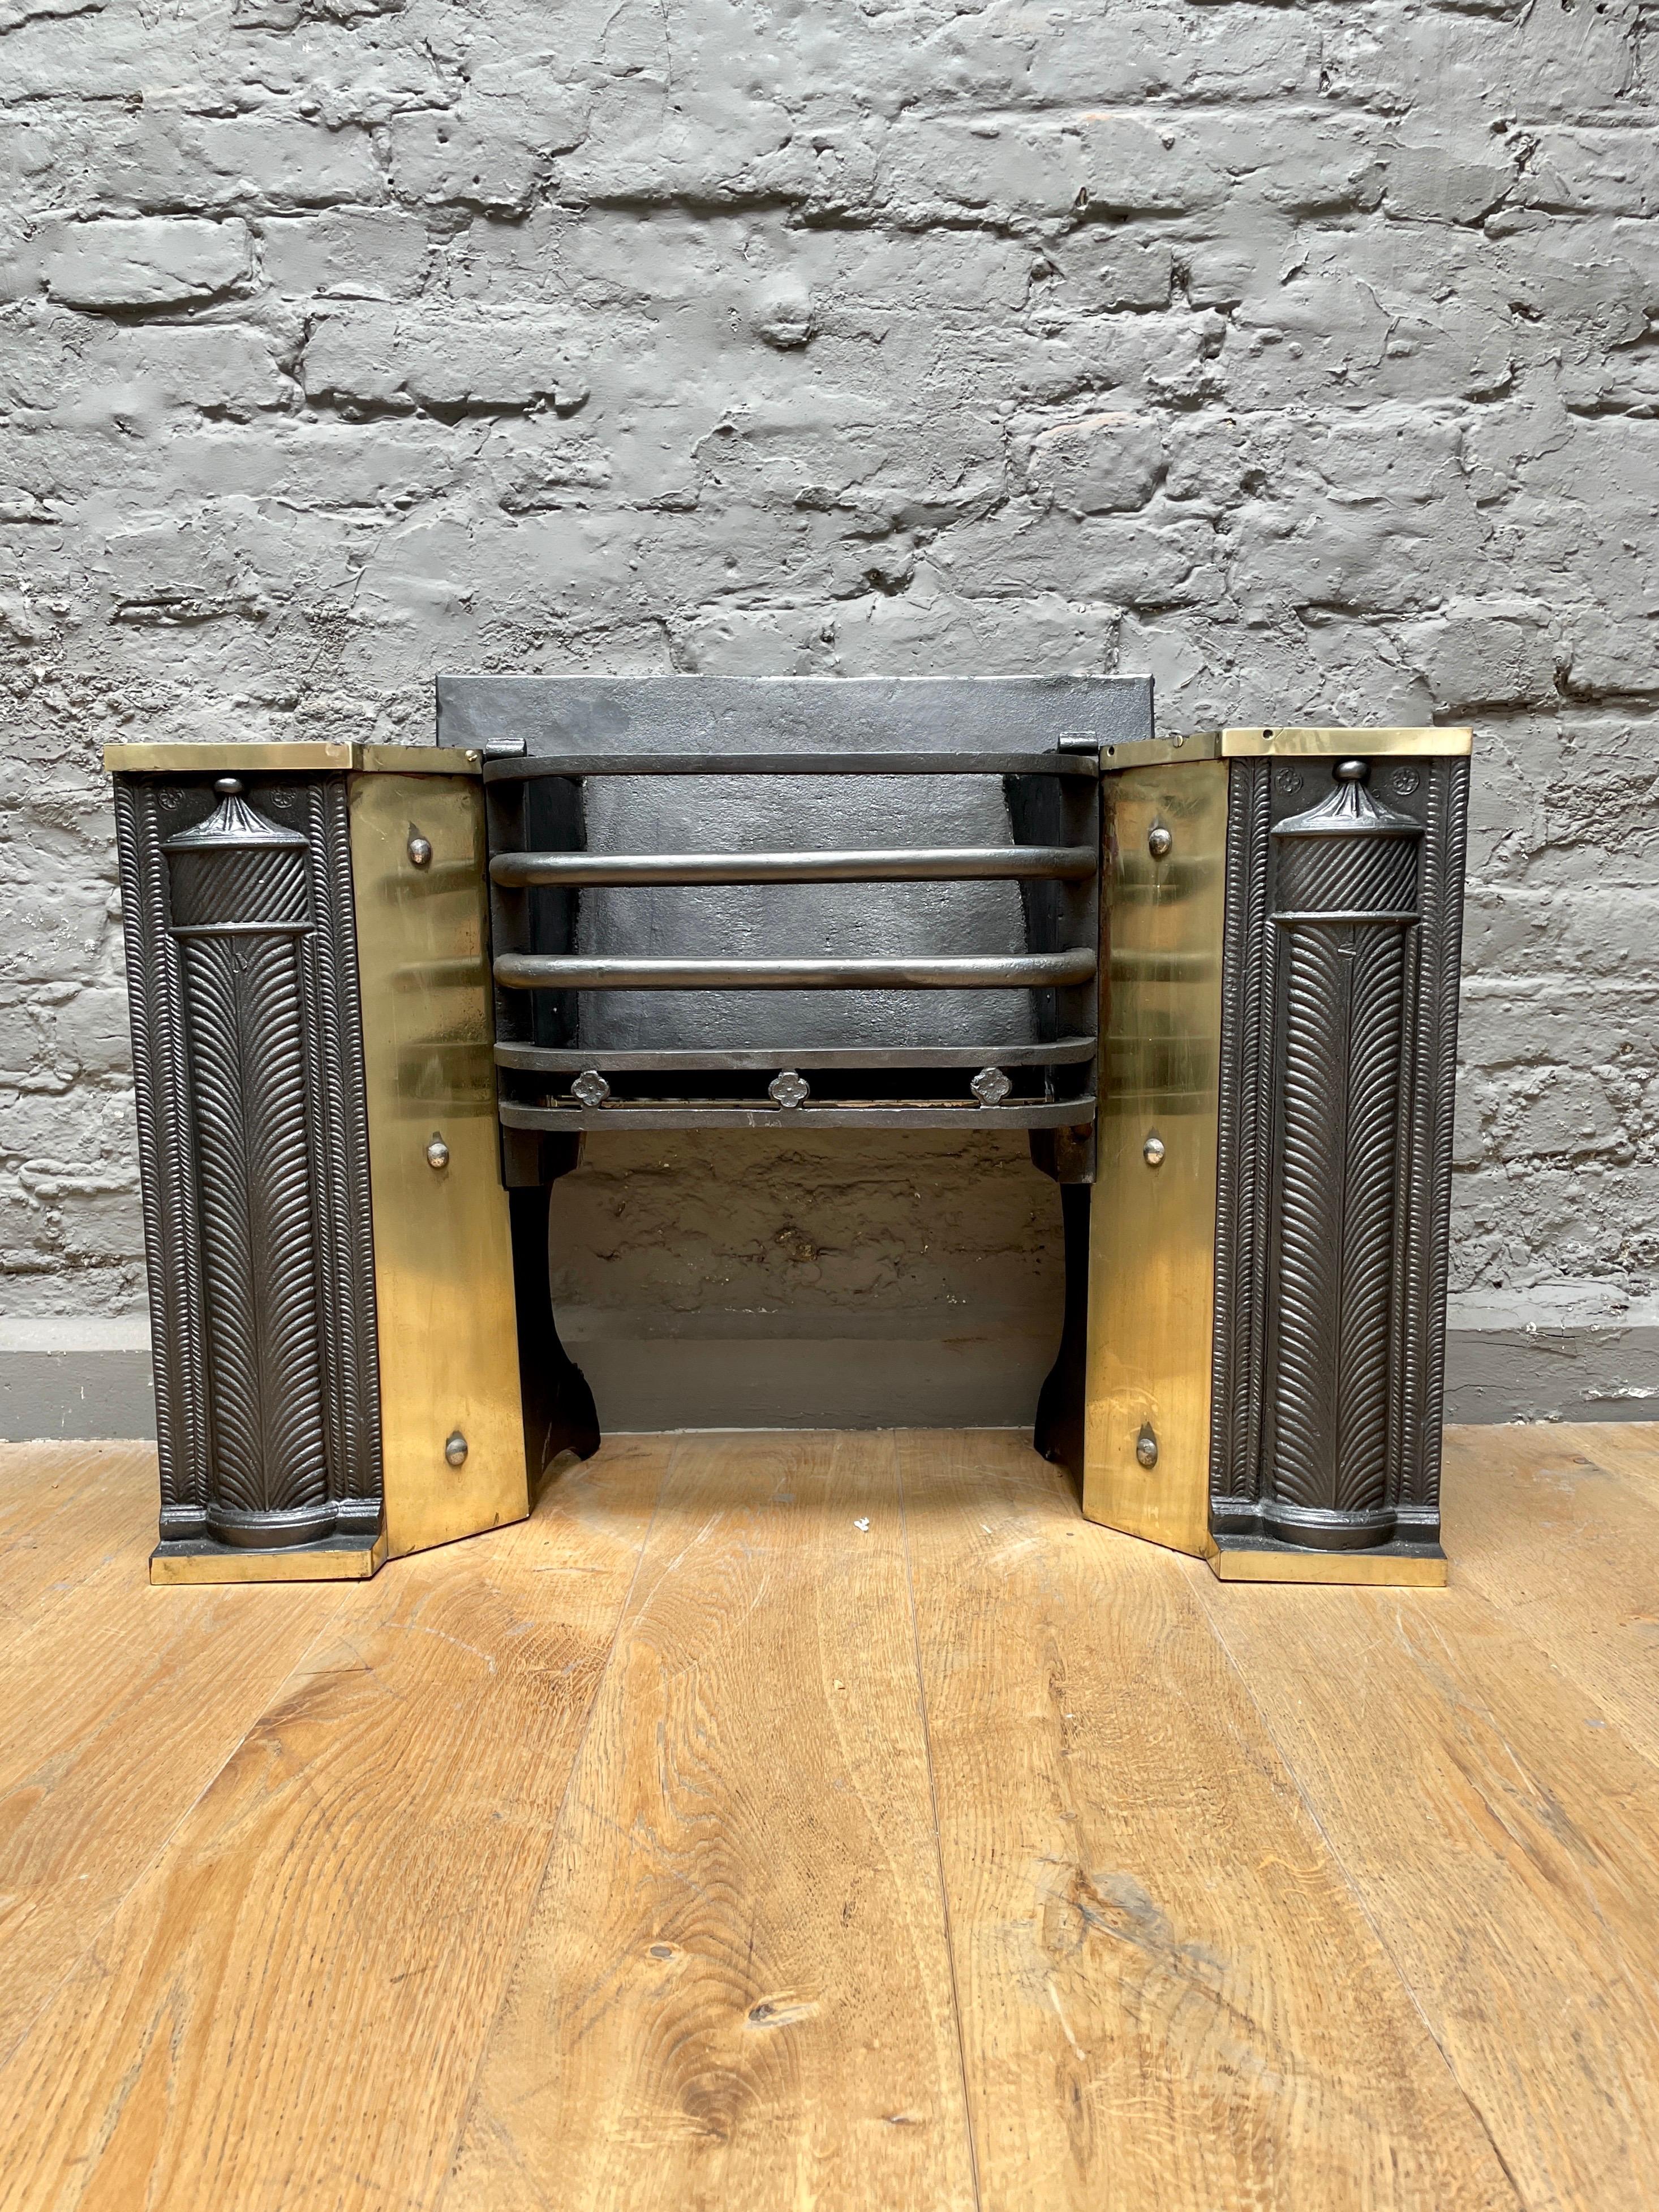 A large and substantial half hob grate in cast iron with brass reflector plates and embellishments. The pillared front panels flanking a bowed bar burning area, which will be enhanced when lit by the polished brass reflector plates. A good quality